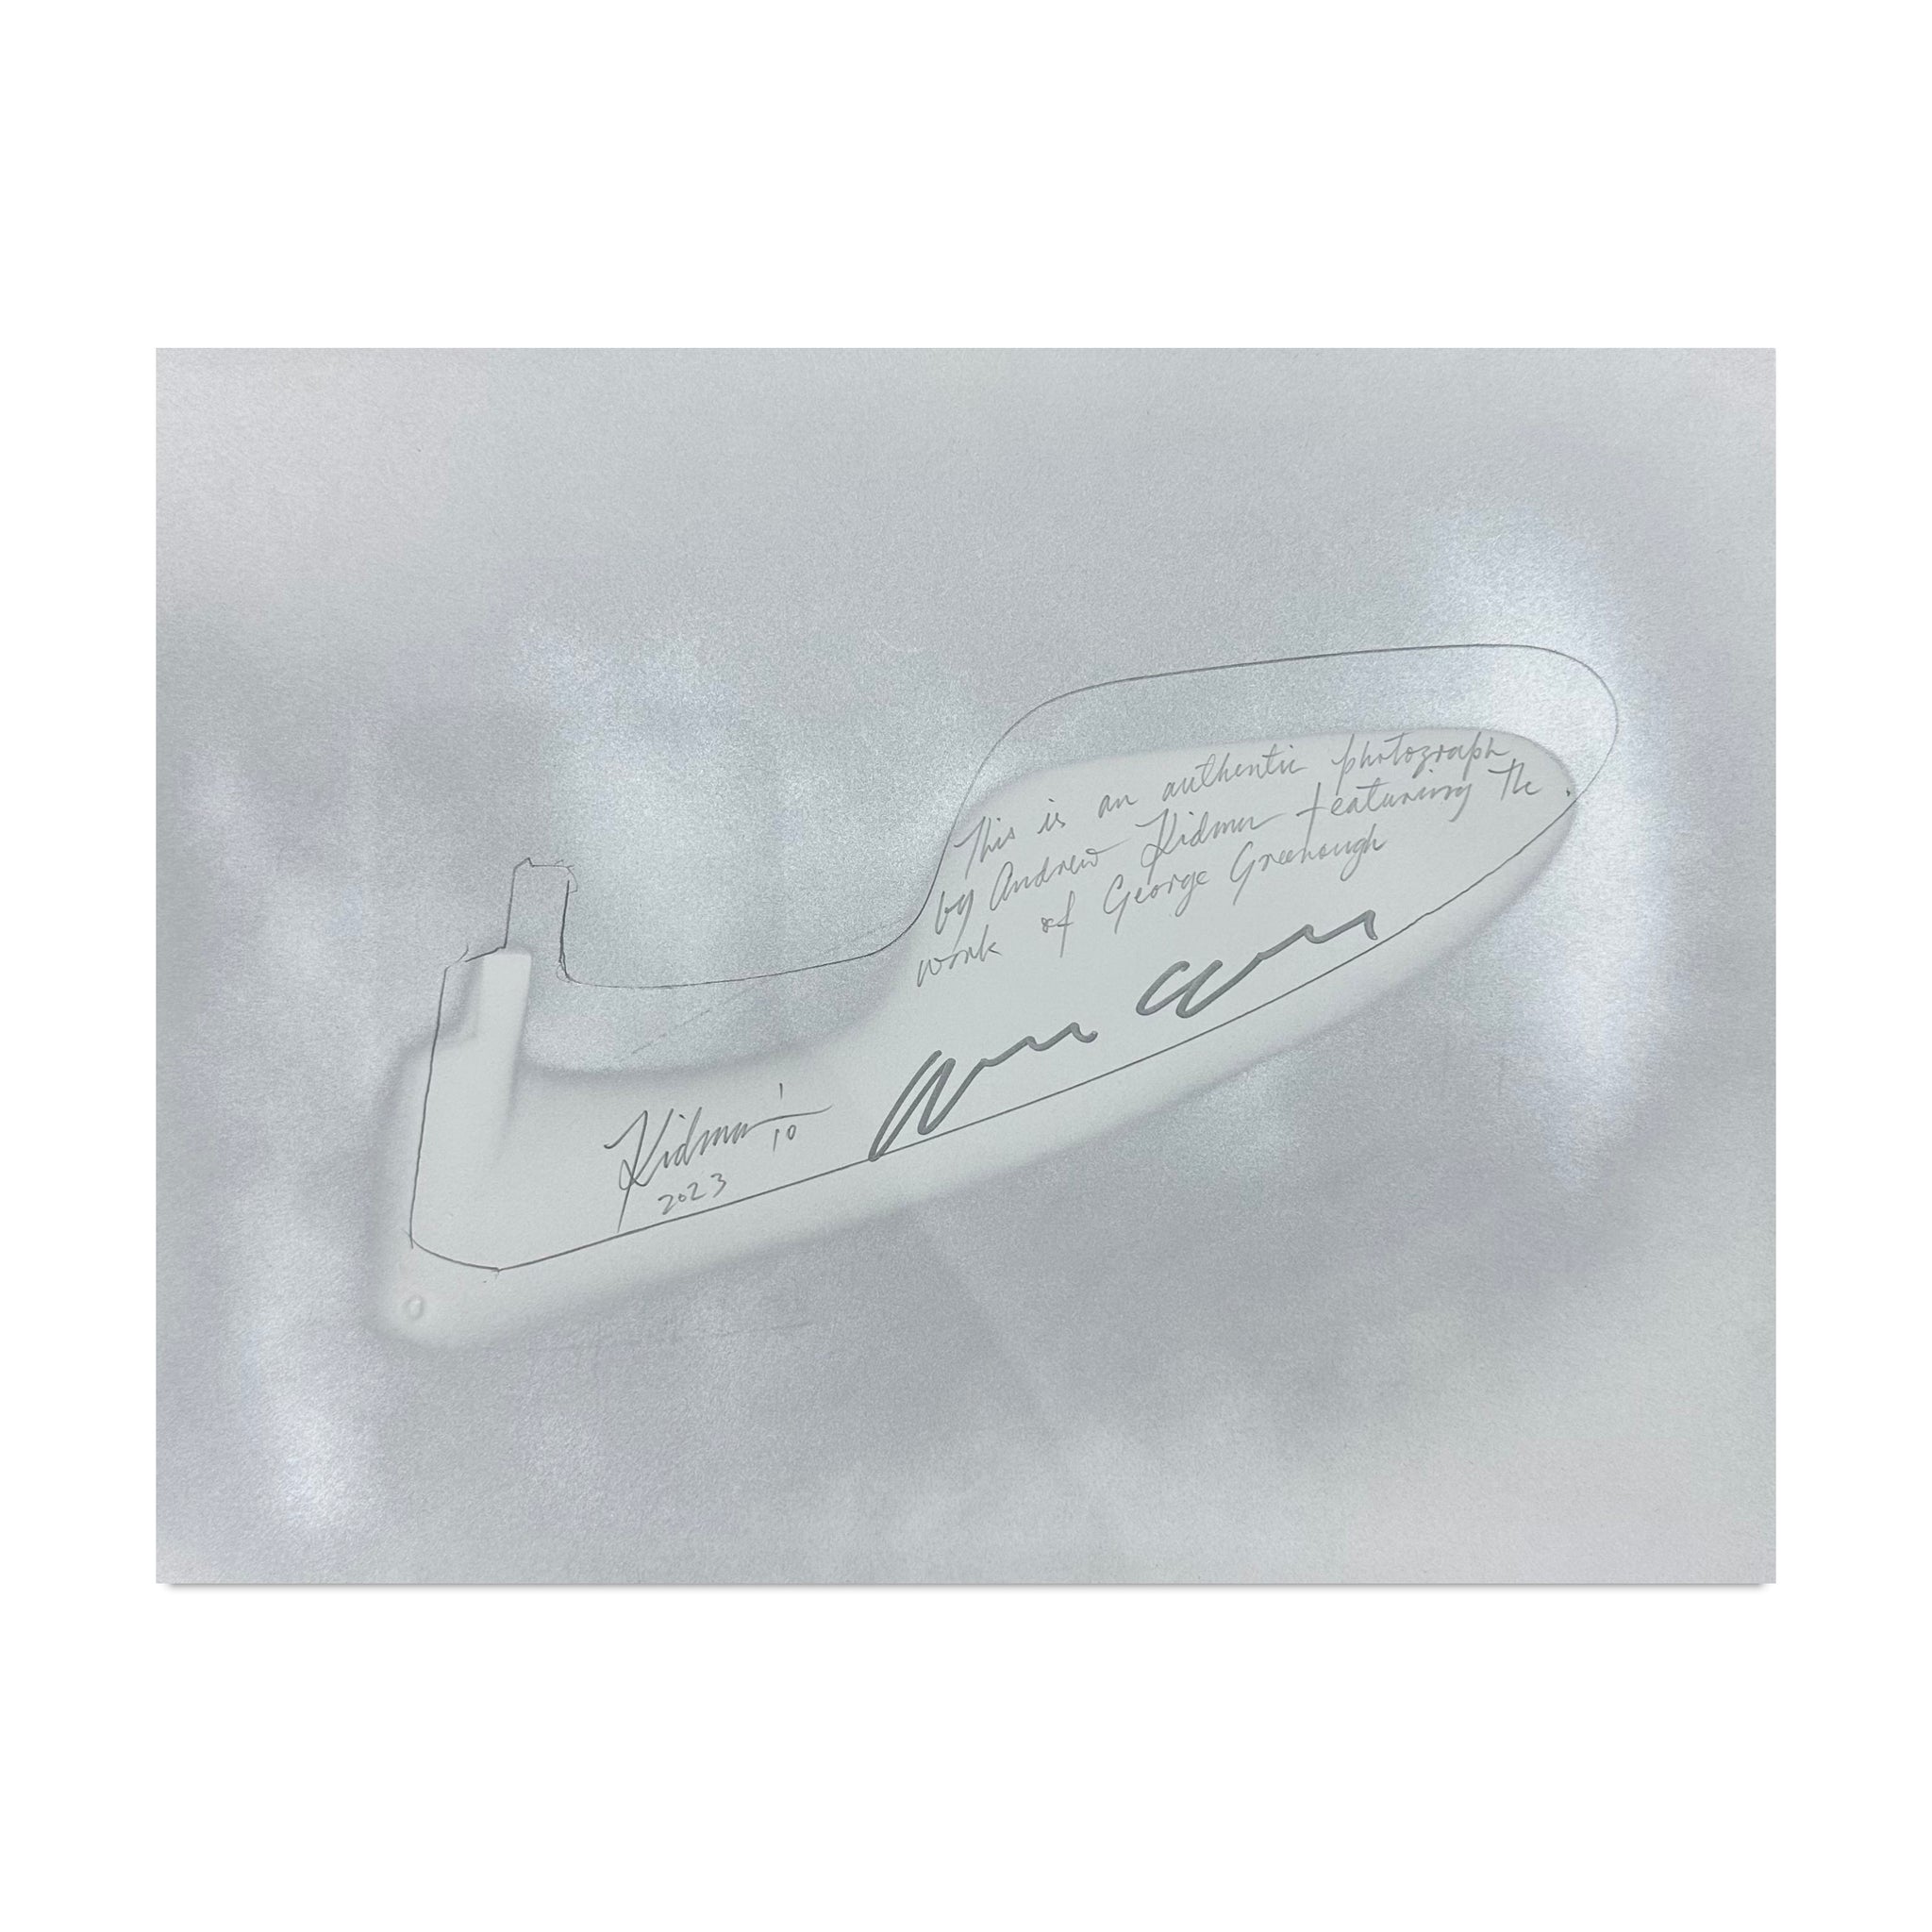 Andrew Kidman: Blade fin panel and fins